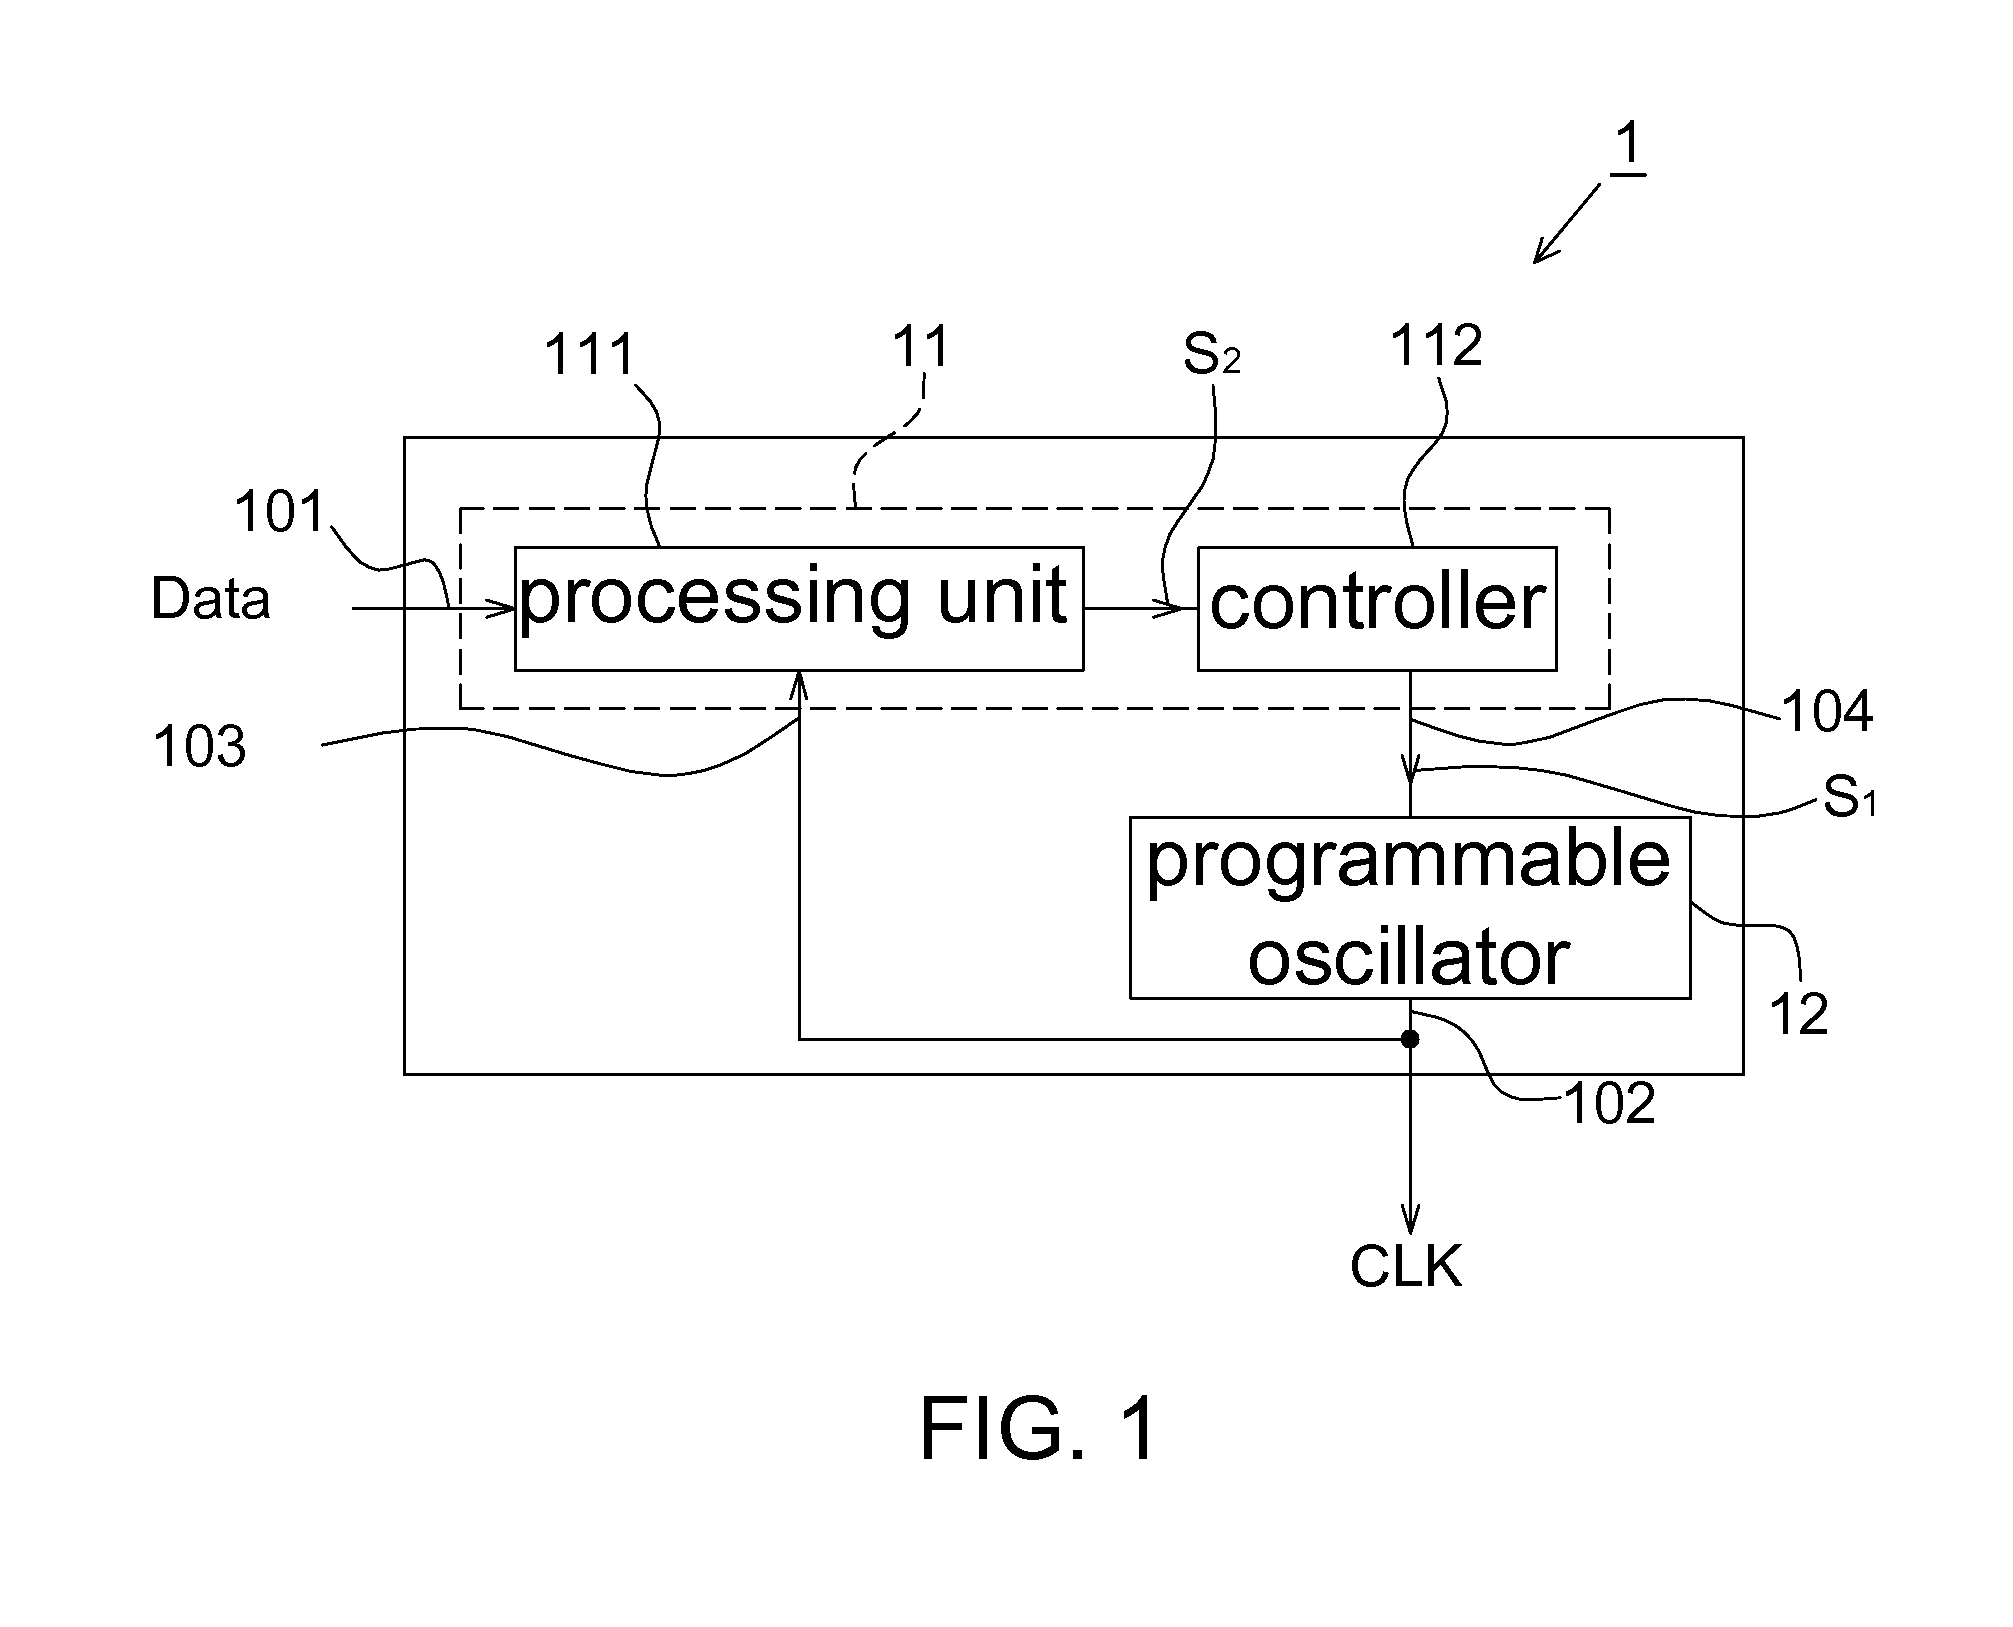 Operating method of human interface device